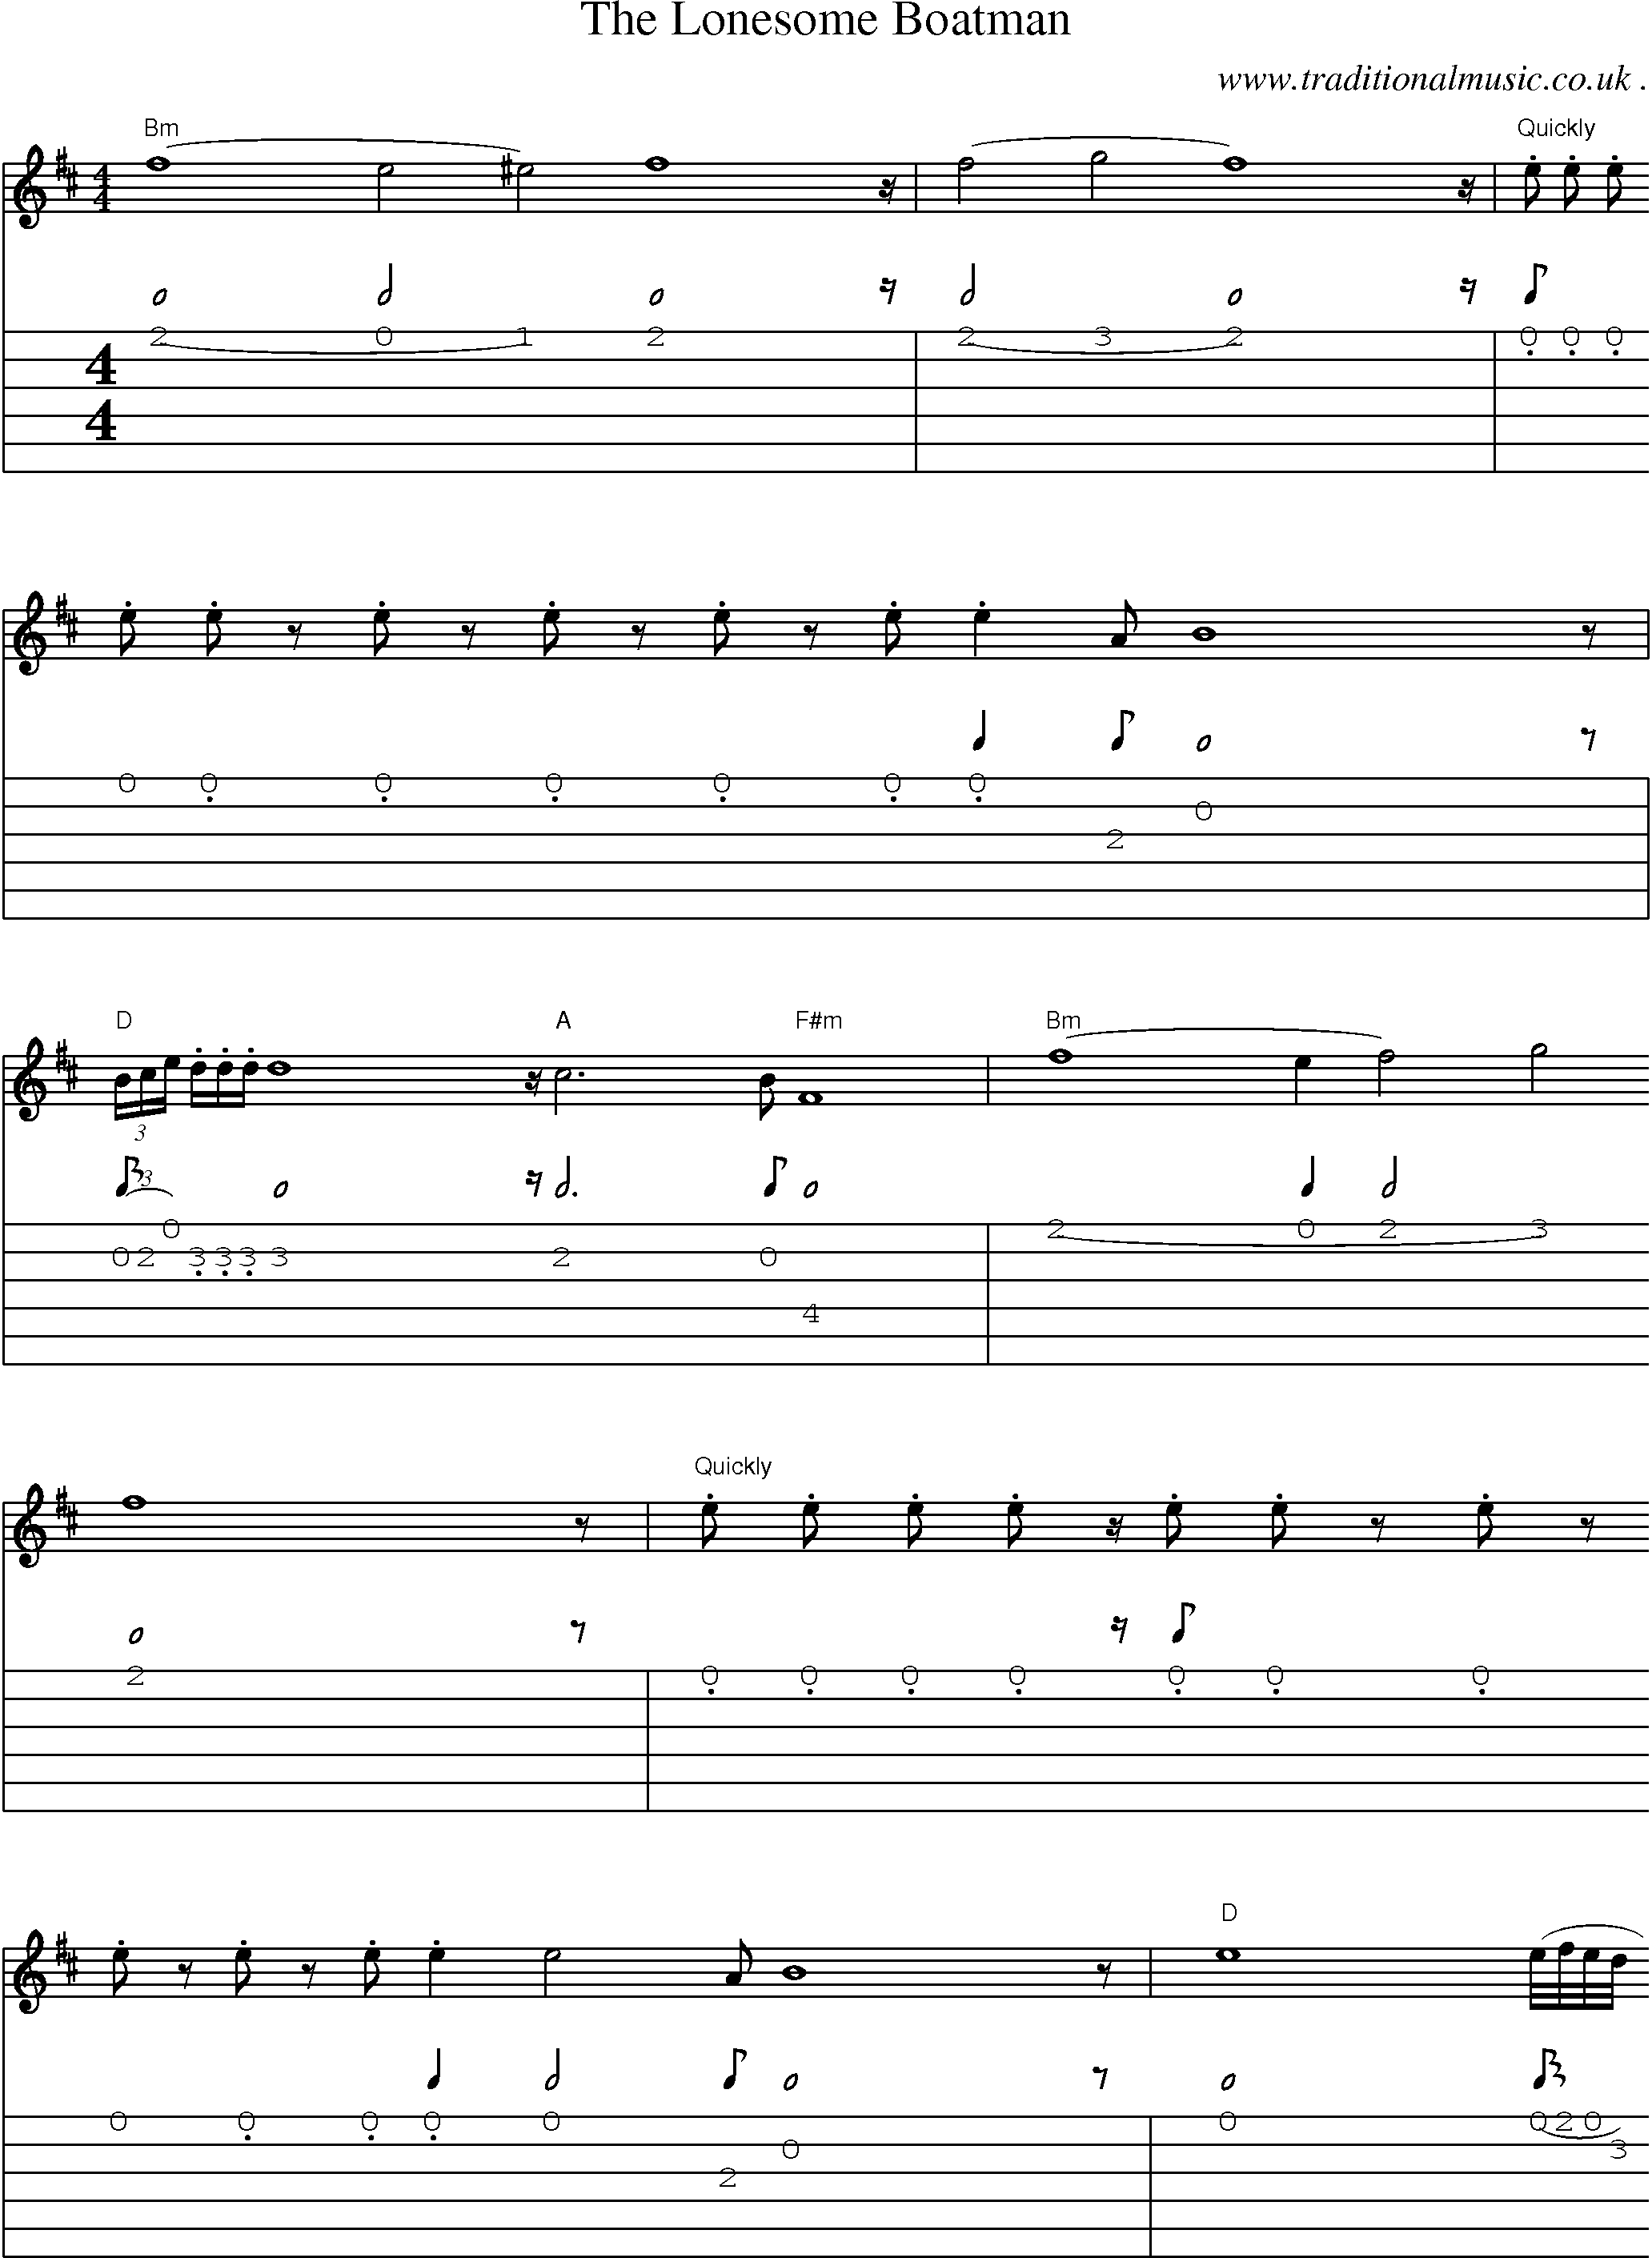 Sheet-Music and Guitar Tabs for The Lonesome Boatman